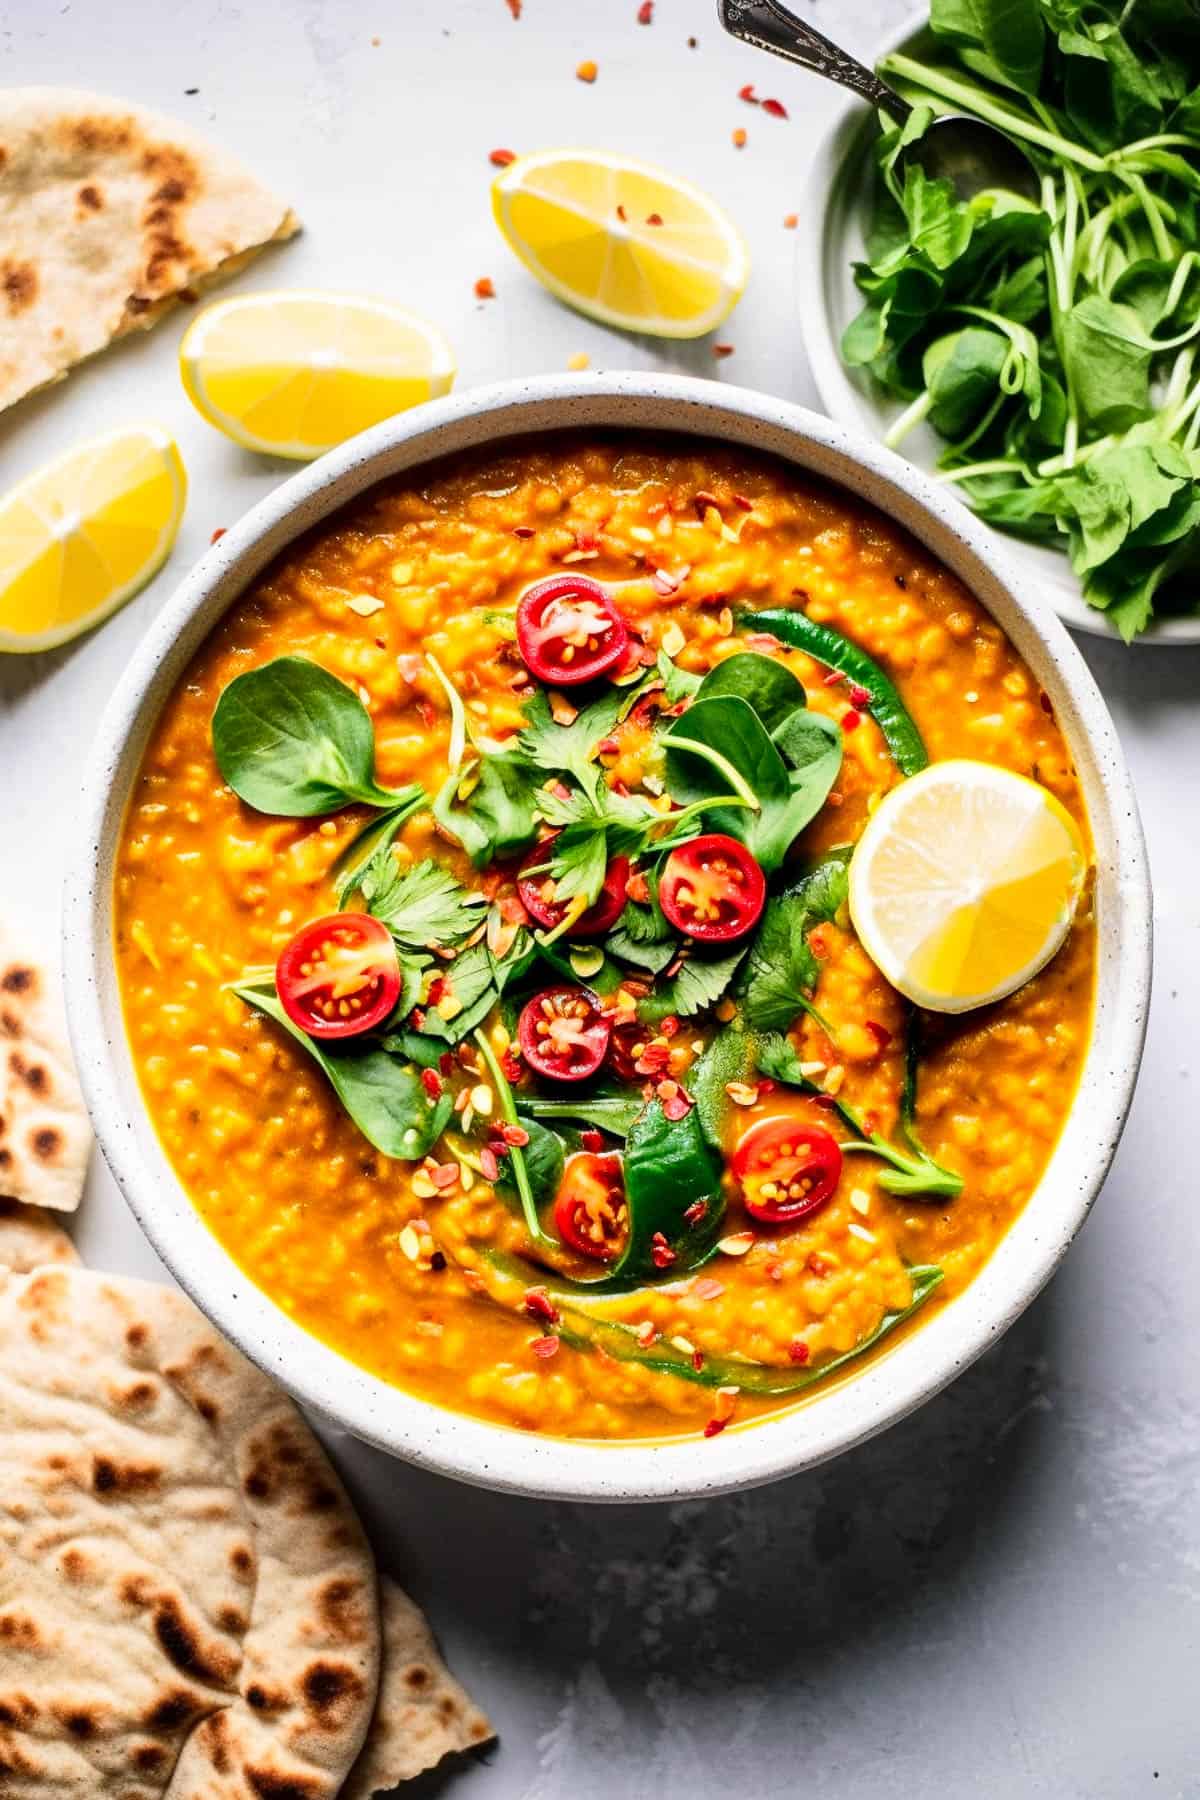 Red lentil dhal with tomatoes and spinach in a bowl with lemon.